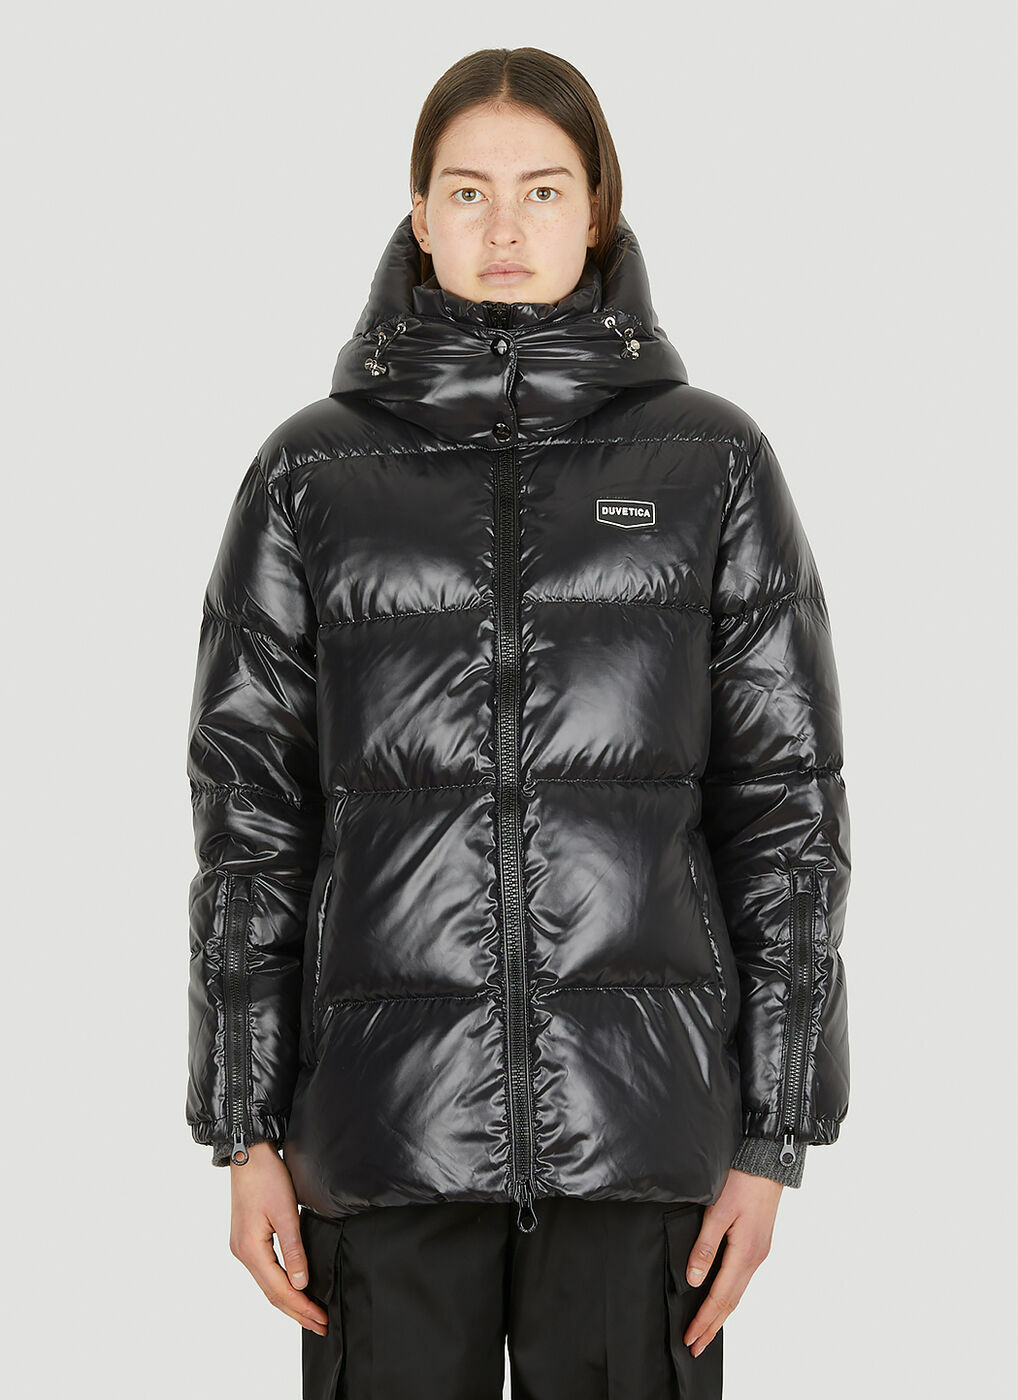 Duvetica - Alloro Quilted Down Jacket in Black Duvetica